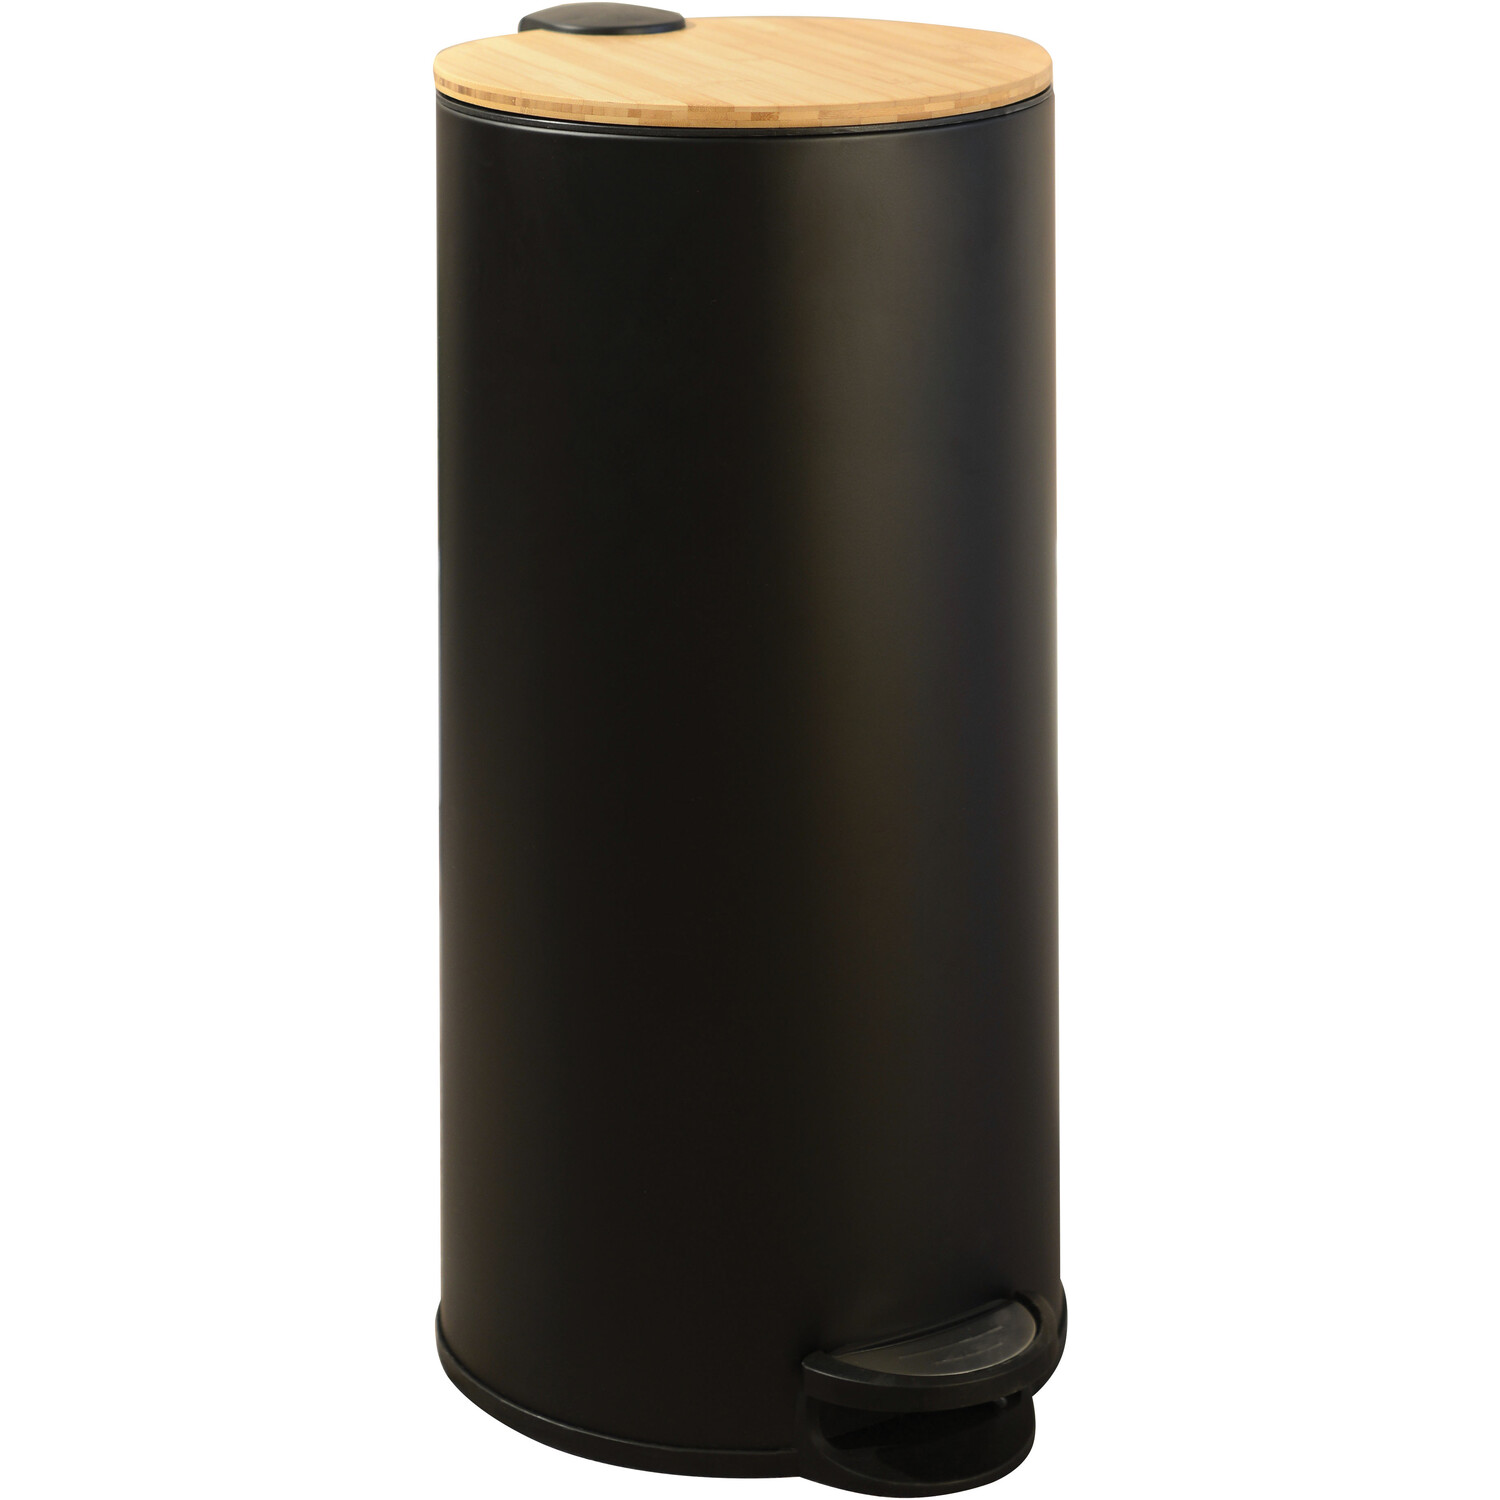 Round Black Pedal Bin with Bamboo Lid 30L Image 1